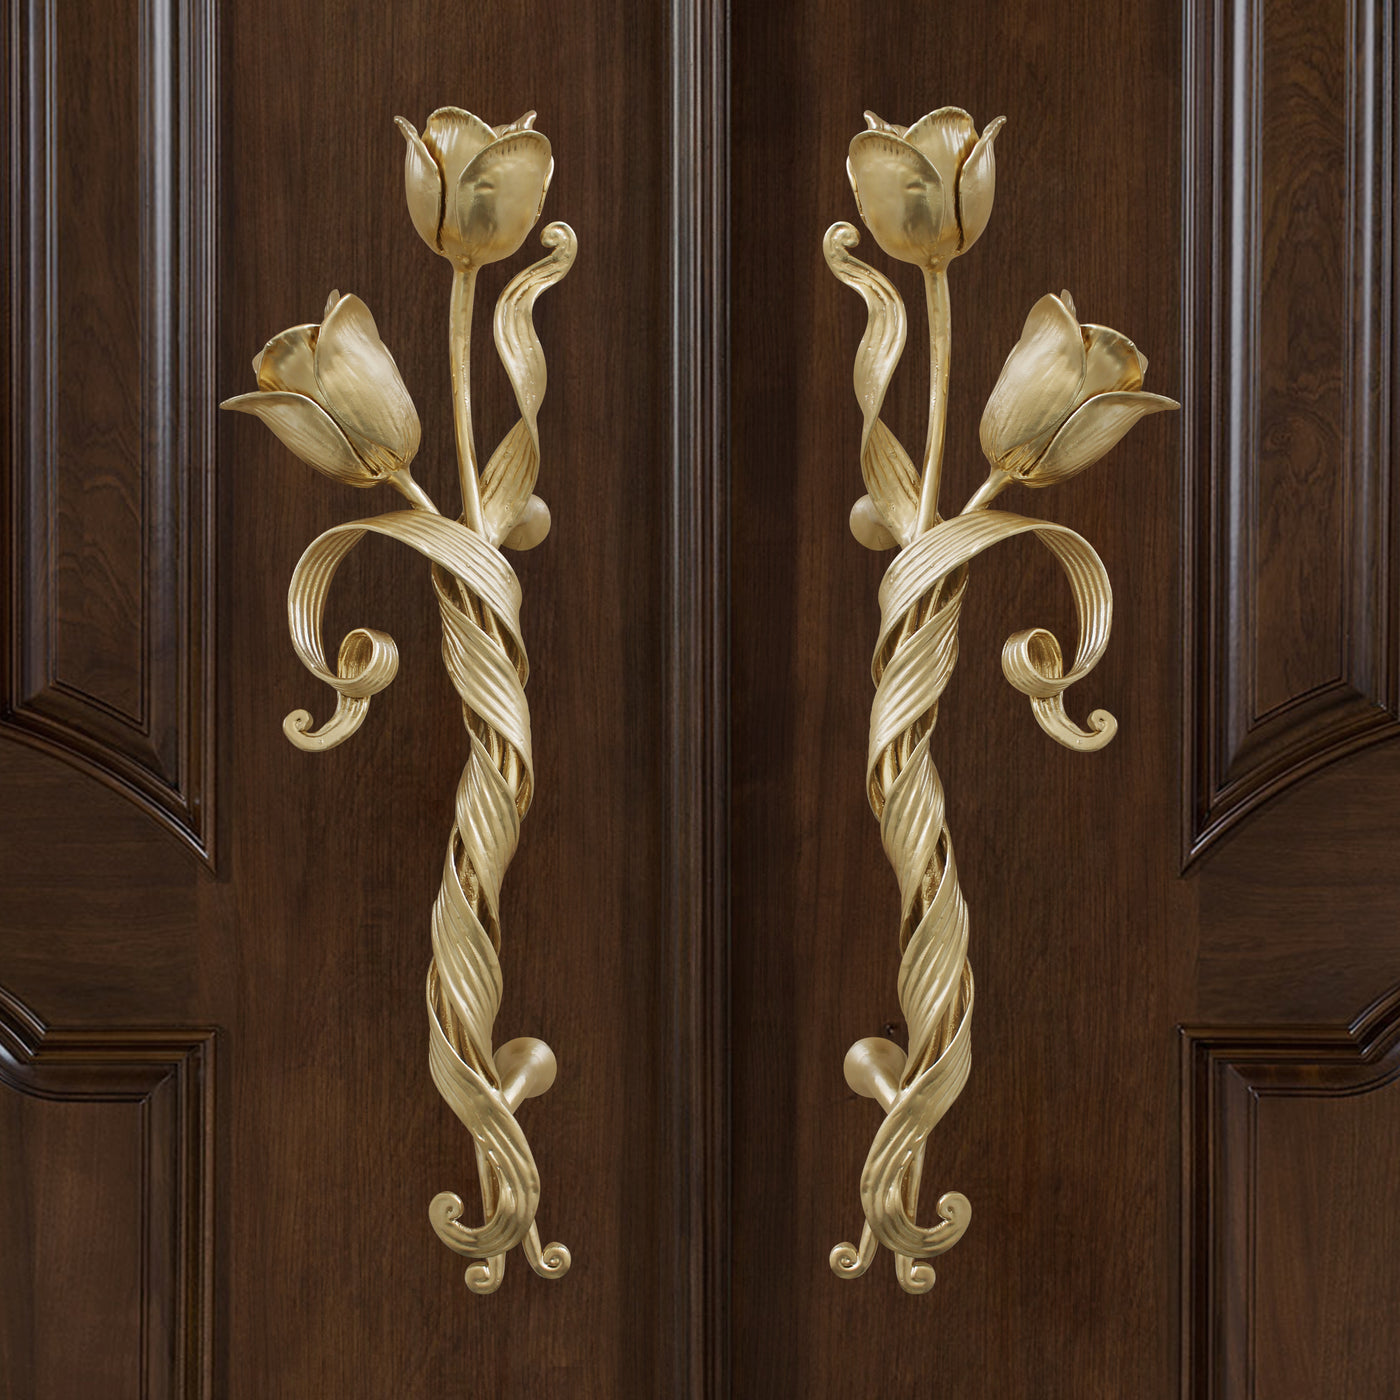 Pair of golden decorative pull handles inspired by tulips mounted on a closed wooden door